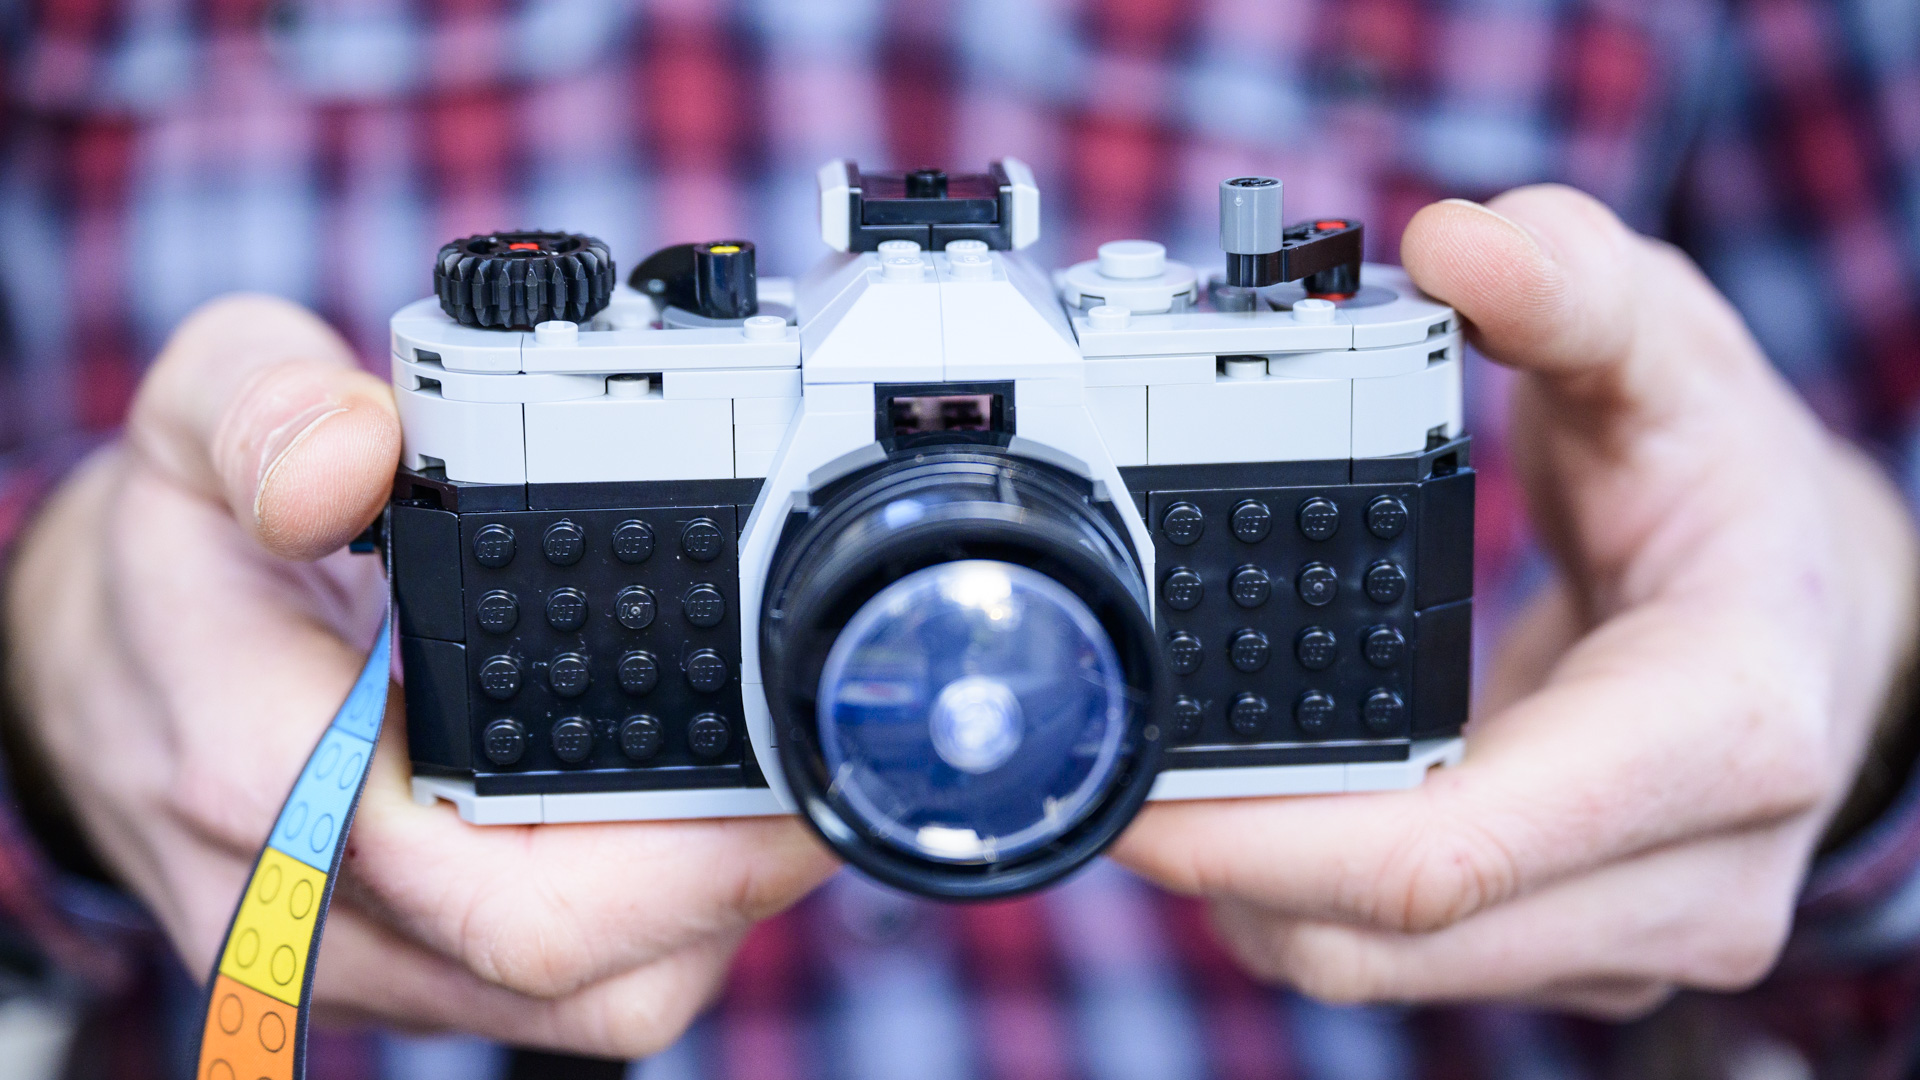 The completed Lego Retro camera in the hand